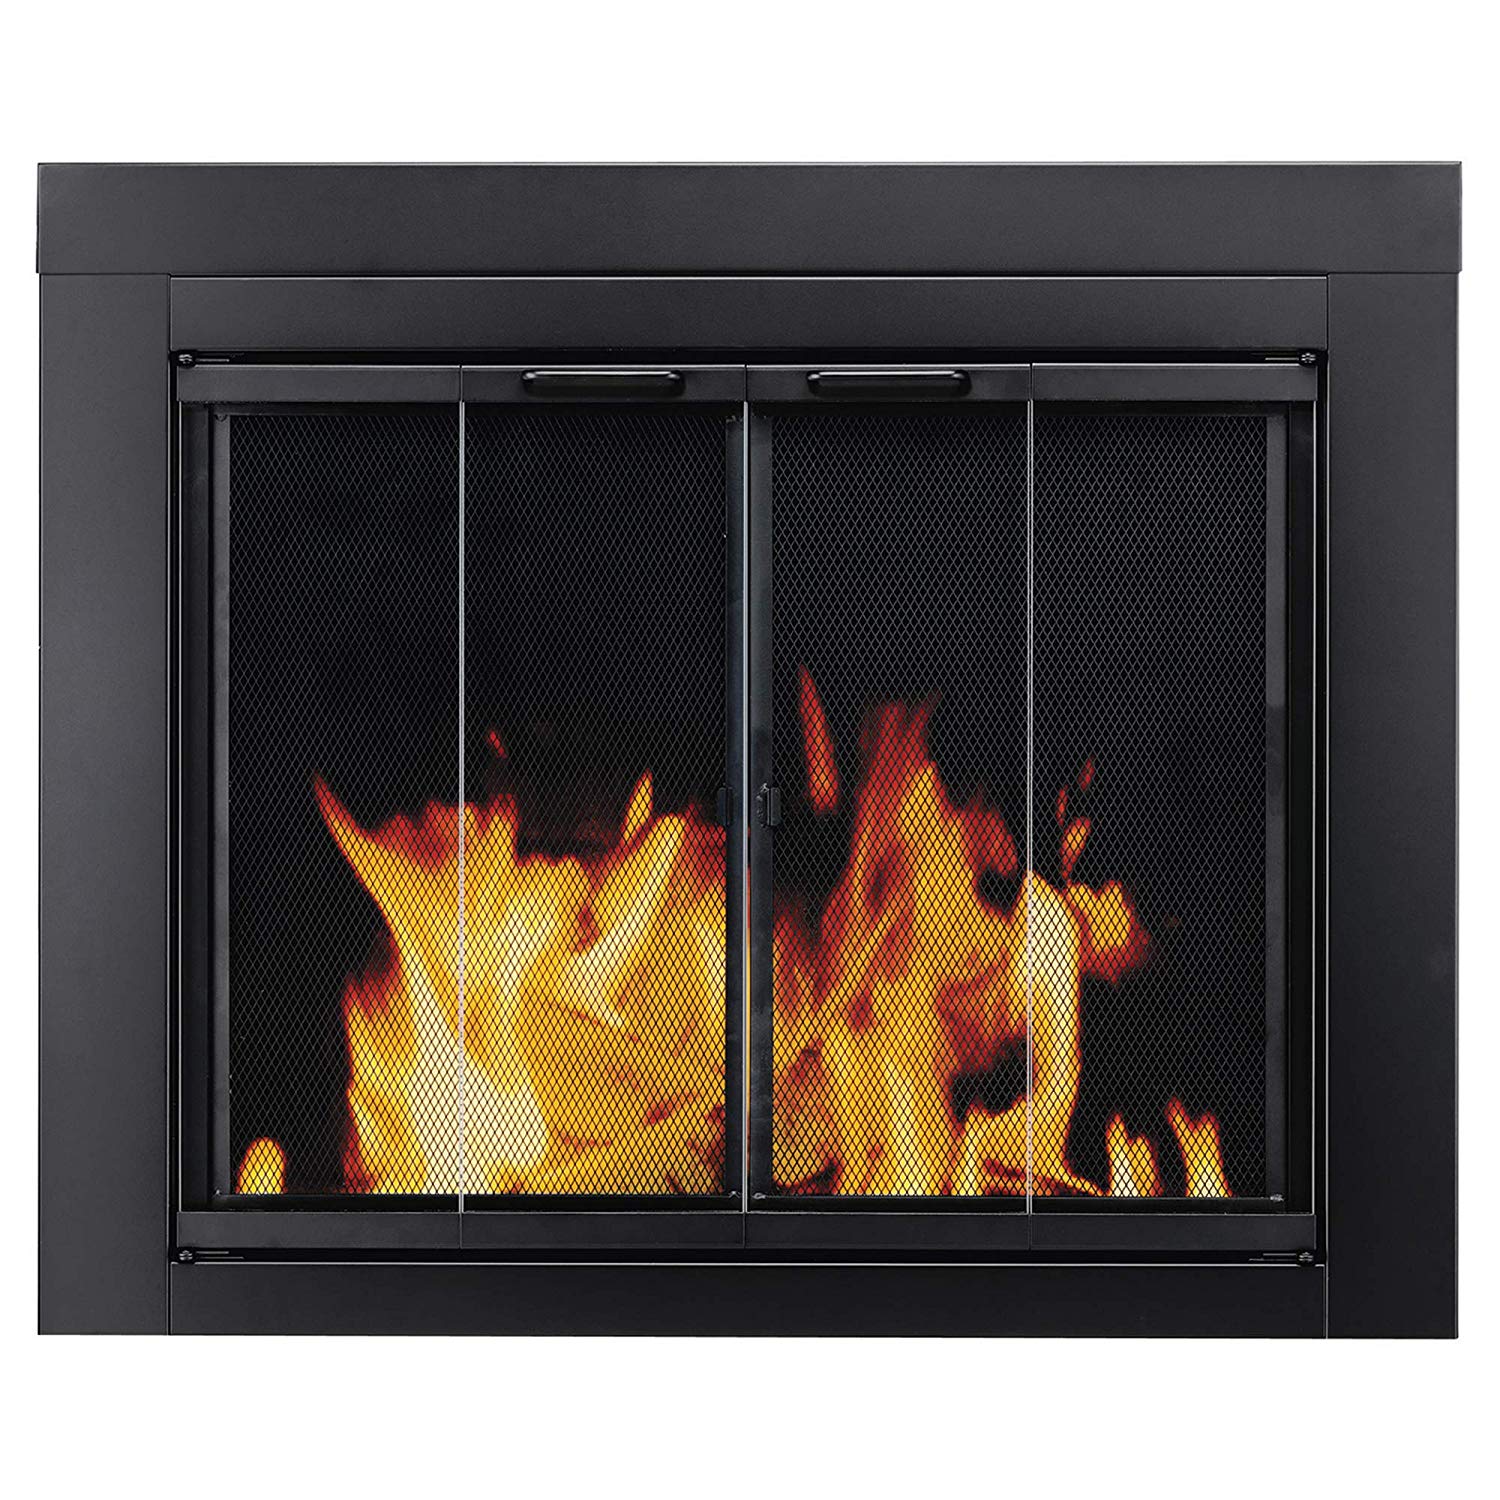 Show Me Fireplaces Luxury Pleasant Hearth at 1000 ascot Fireplace Glass Door Black Small